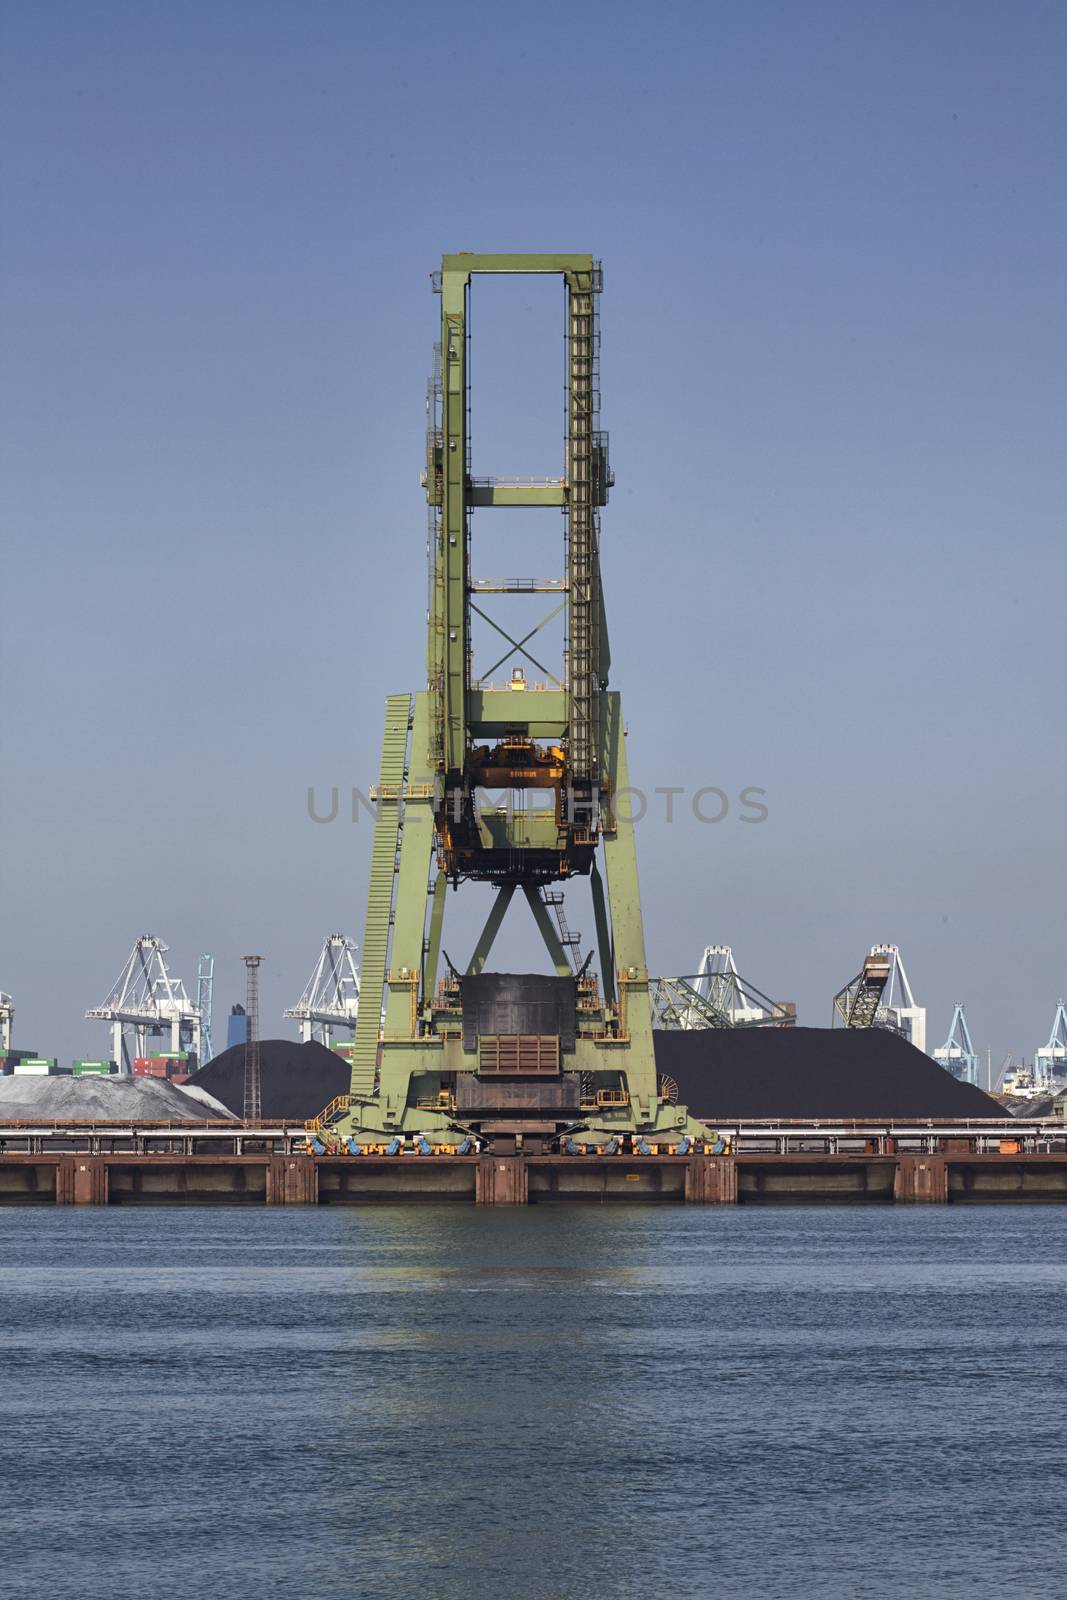 Coal cranes in the harbor of rotterdam by janssenkruseproductions